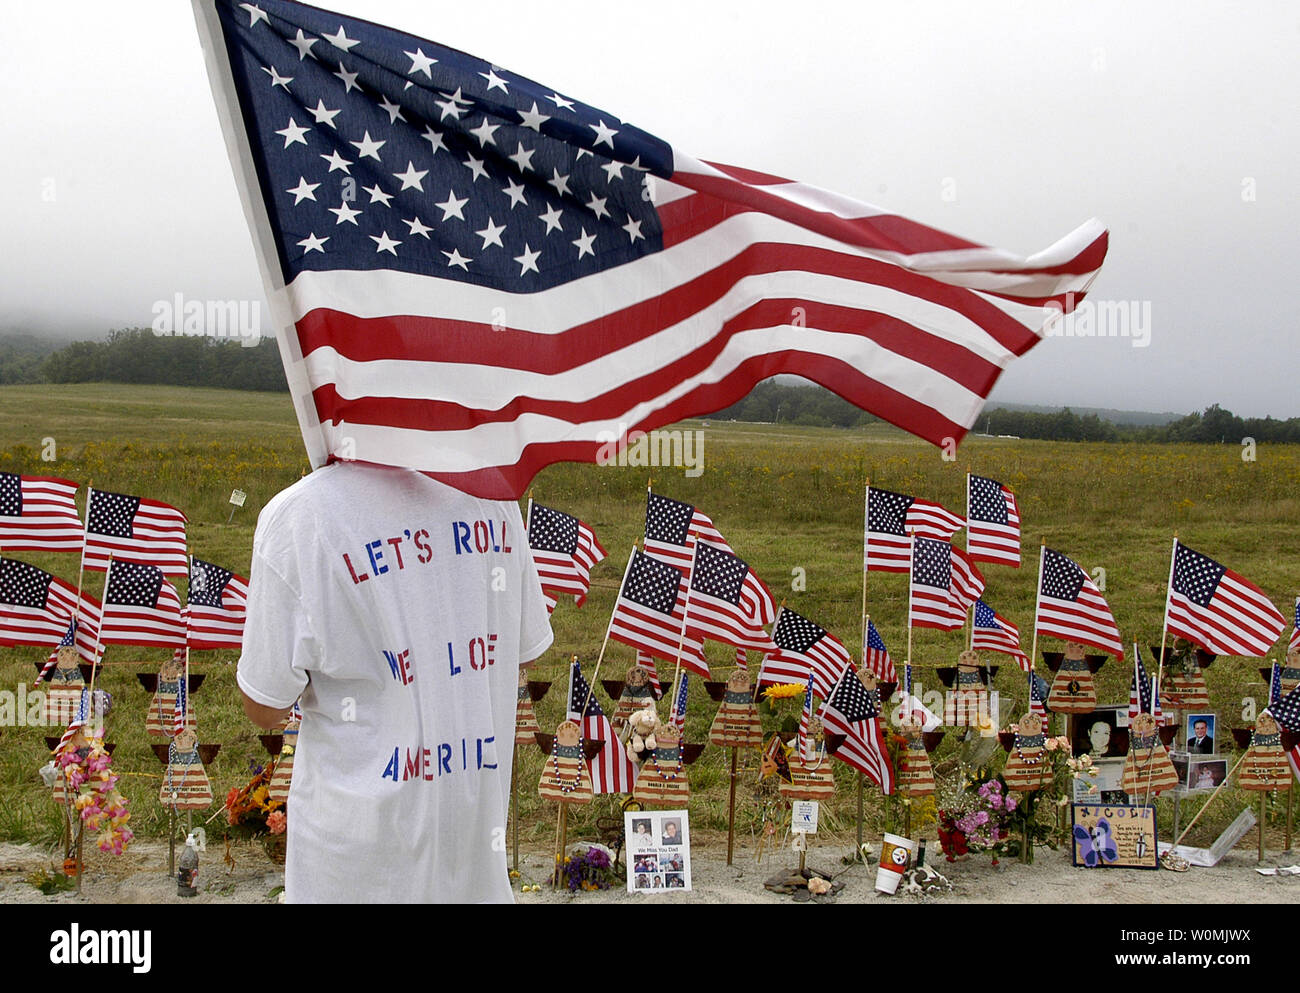 William Ura, age 20 of McKeesport, PA, carries an American flag and looks out towards the crash site of Flight 93 while visiting the temporary memorial near Shanksville, Pennsylvania on September 11, 2006. September 11, 2011 marks the tenth anniversary of the terrorist attacks on the World Trade Center, Pentagon and the crash of flight 93 in Shanksville, Pennsylvania.   UPI/Archie Carpenter Stock Photo